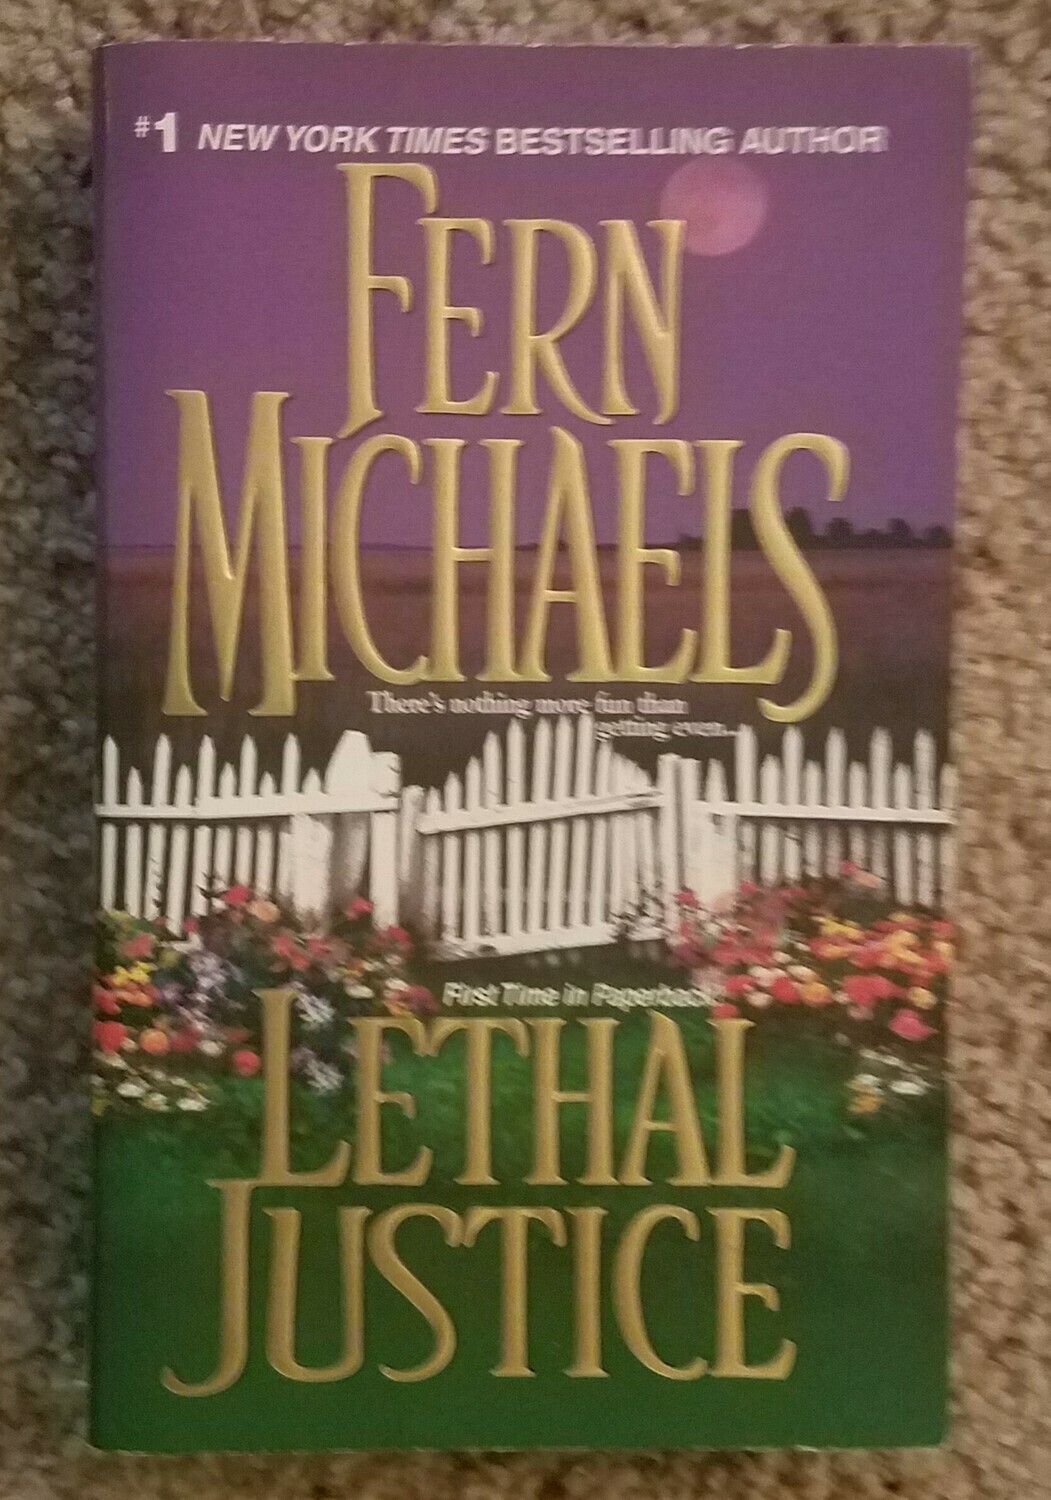 Lethal Justice by Fern Michaels